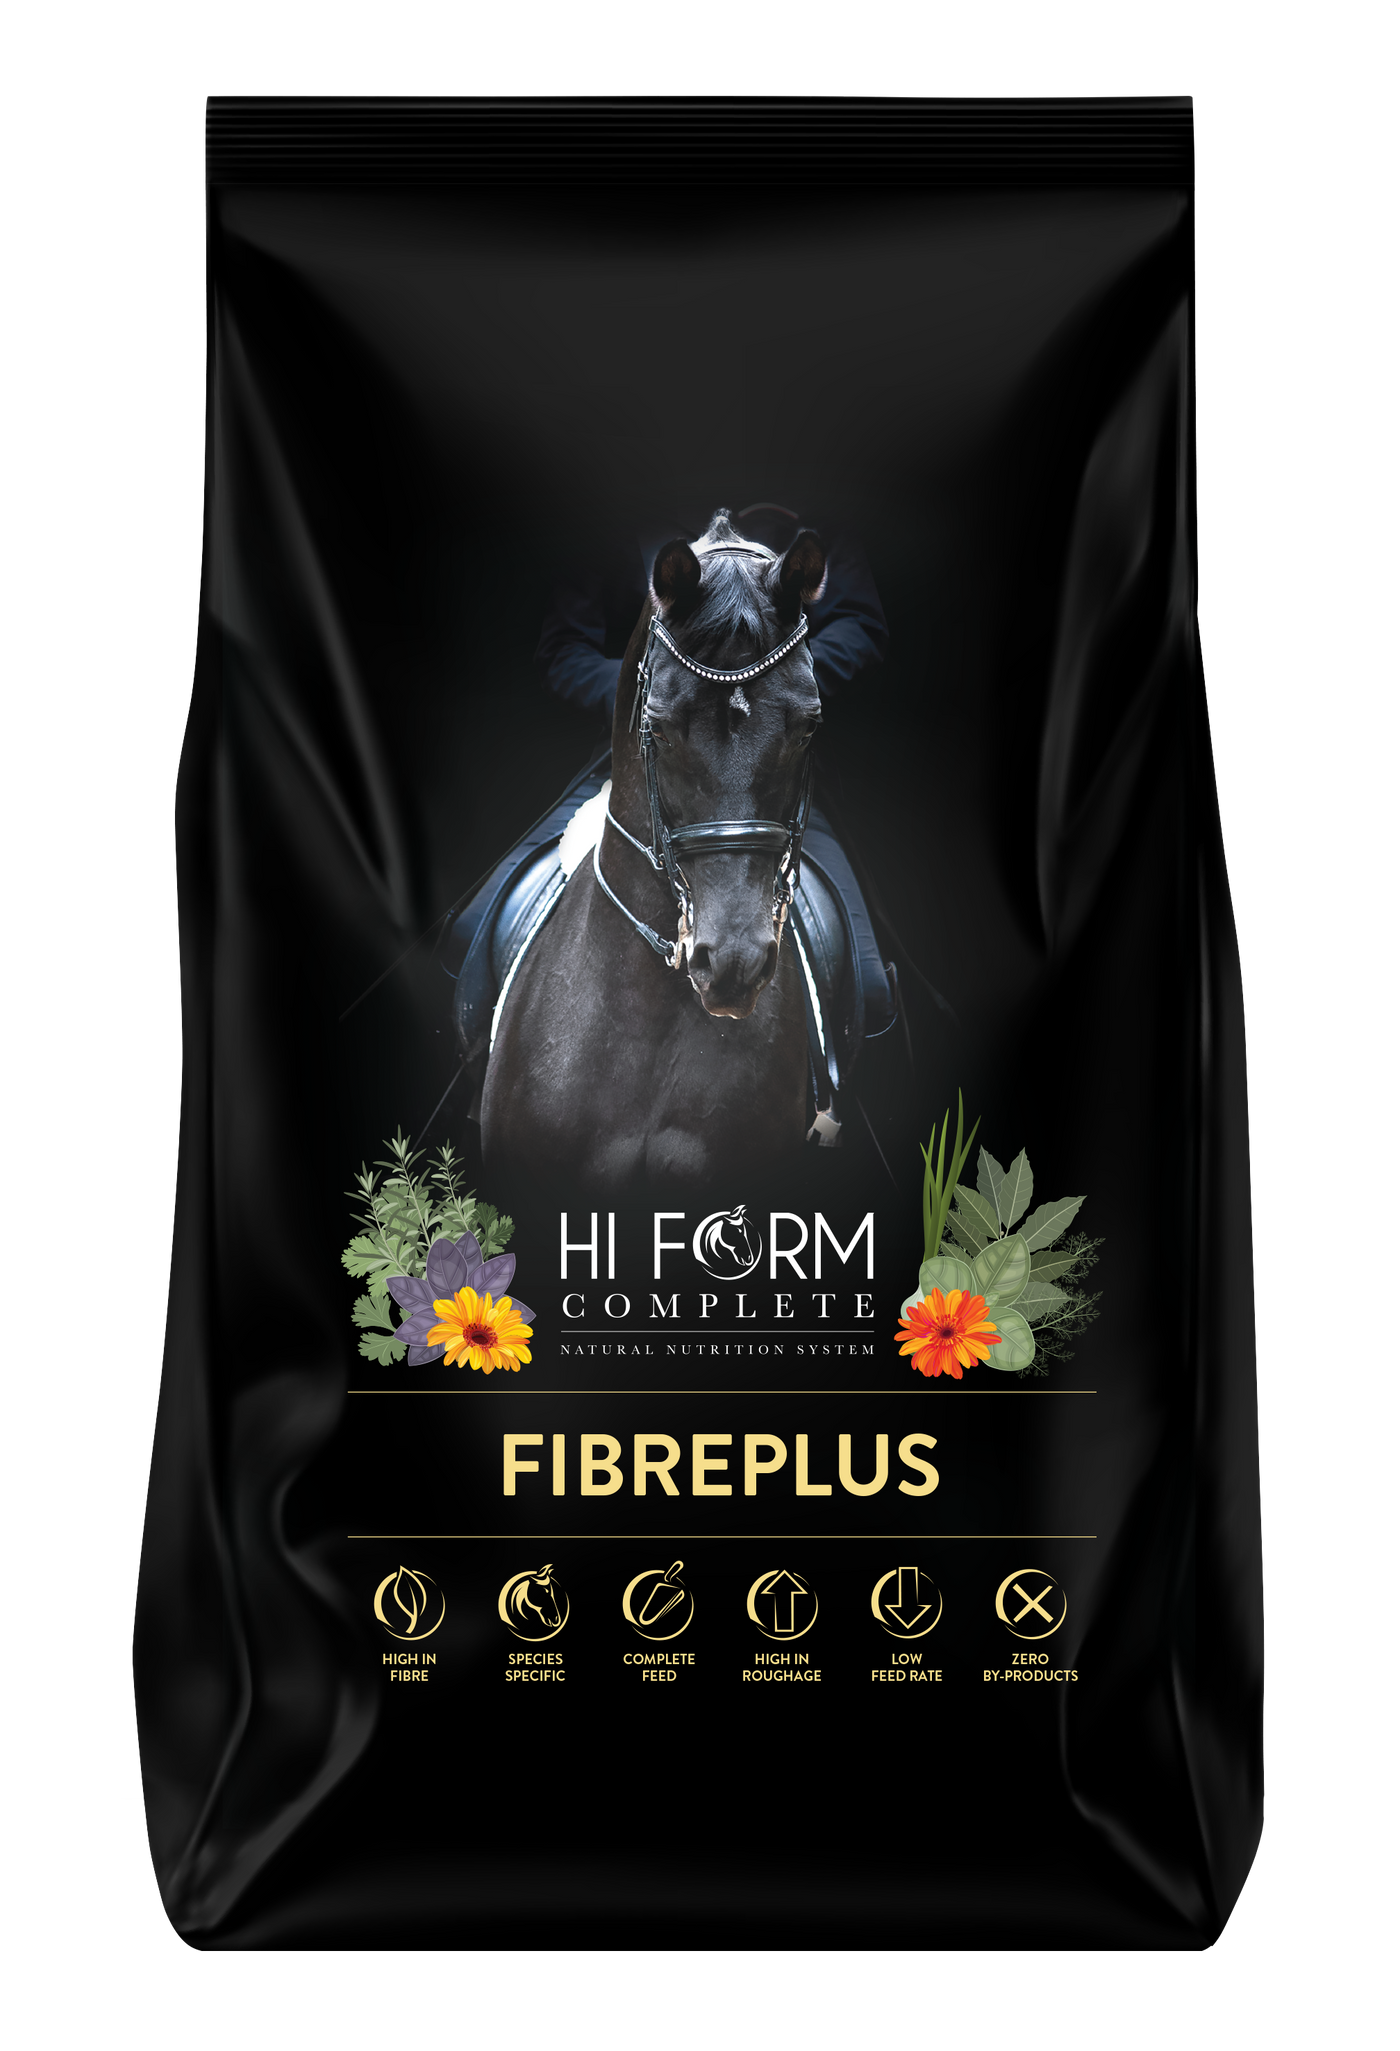 Hi Form Complete feed the Natural Nutrition System for all horses